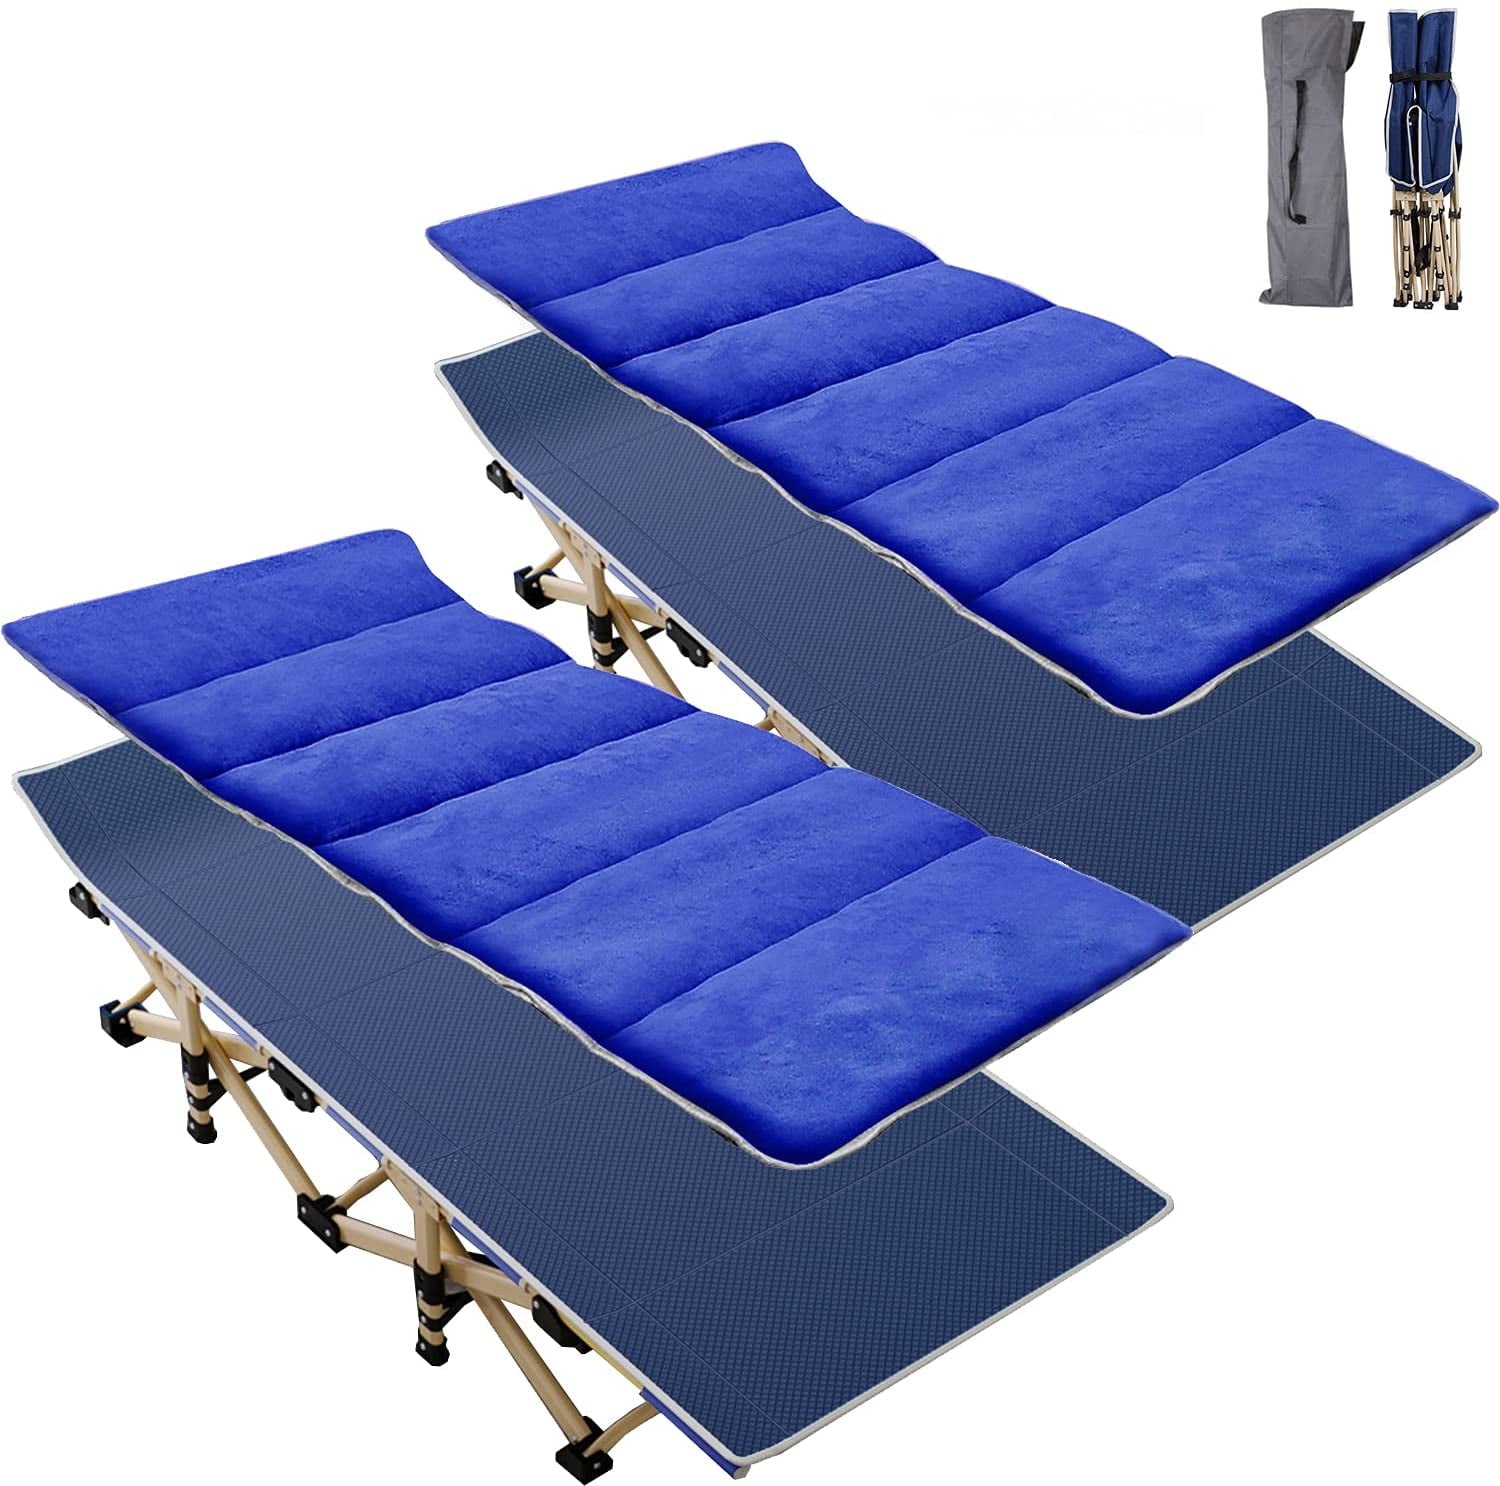 NAIZEA Folding Camping Cots for Adults Folding Cot Bed Camping Bed Camp Cot Portable Military Cot Double Layer Oxford Strong Heavy Duty Wide Sleeping Cots with Carry Bag for Camp Office Use 